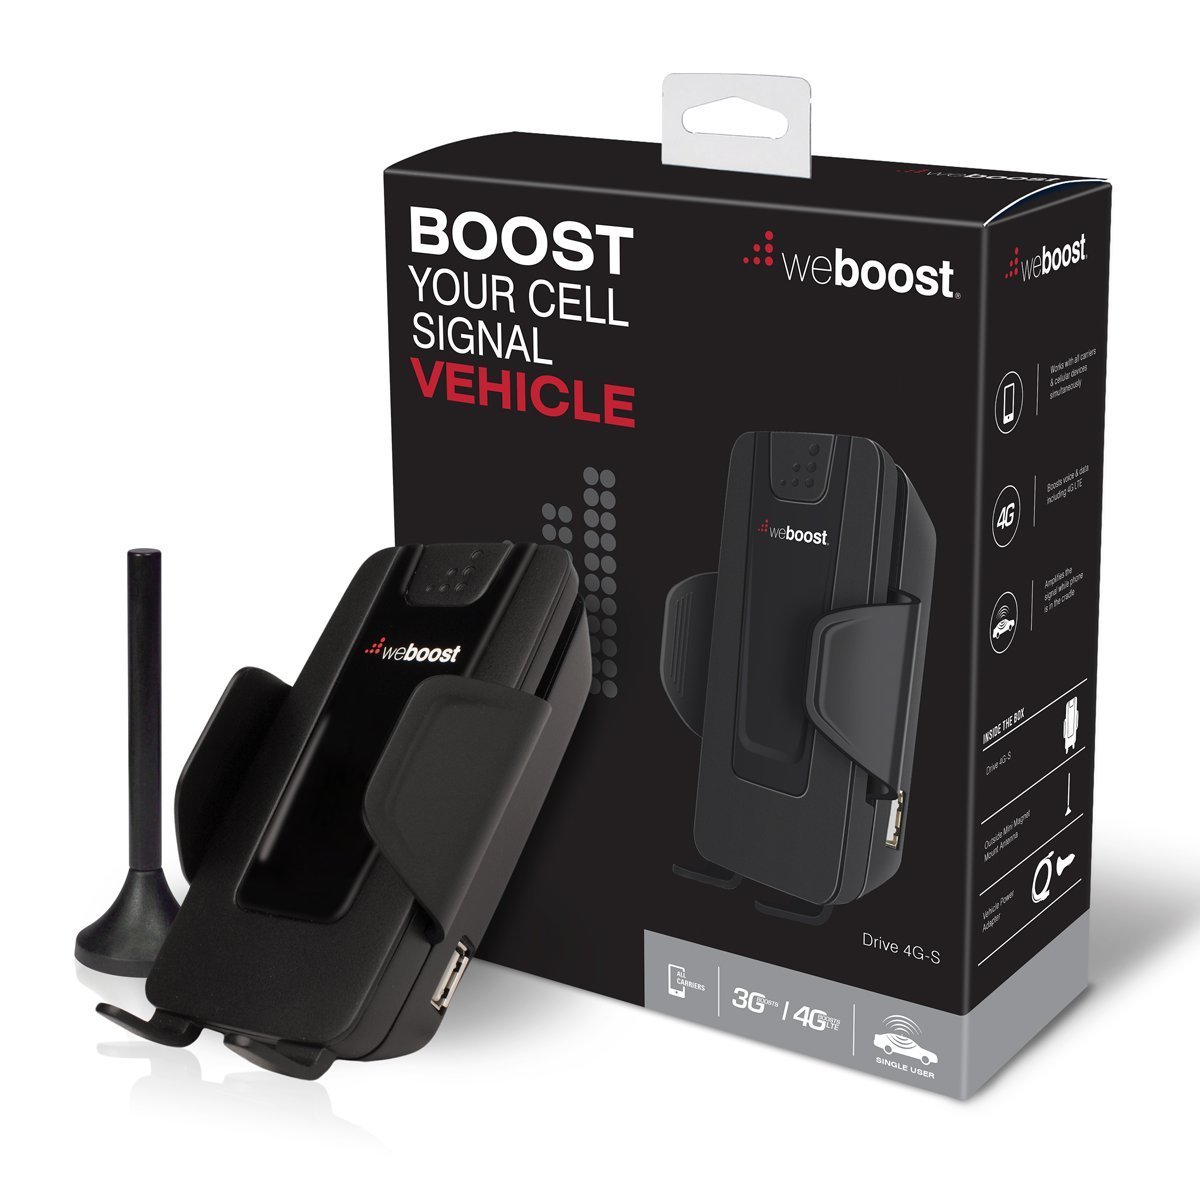 Best Cell Phone Signal Boosters Reviewed in 2021 | EarlyExperts What Is The Best Cell Phone Booster For At&t